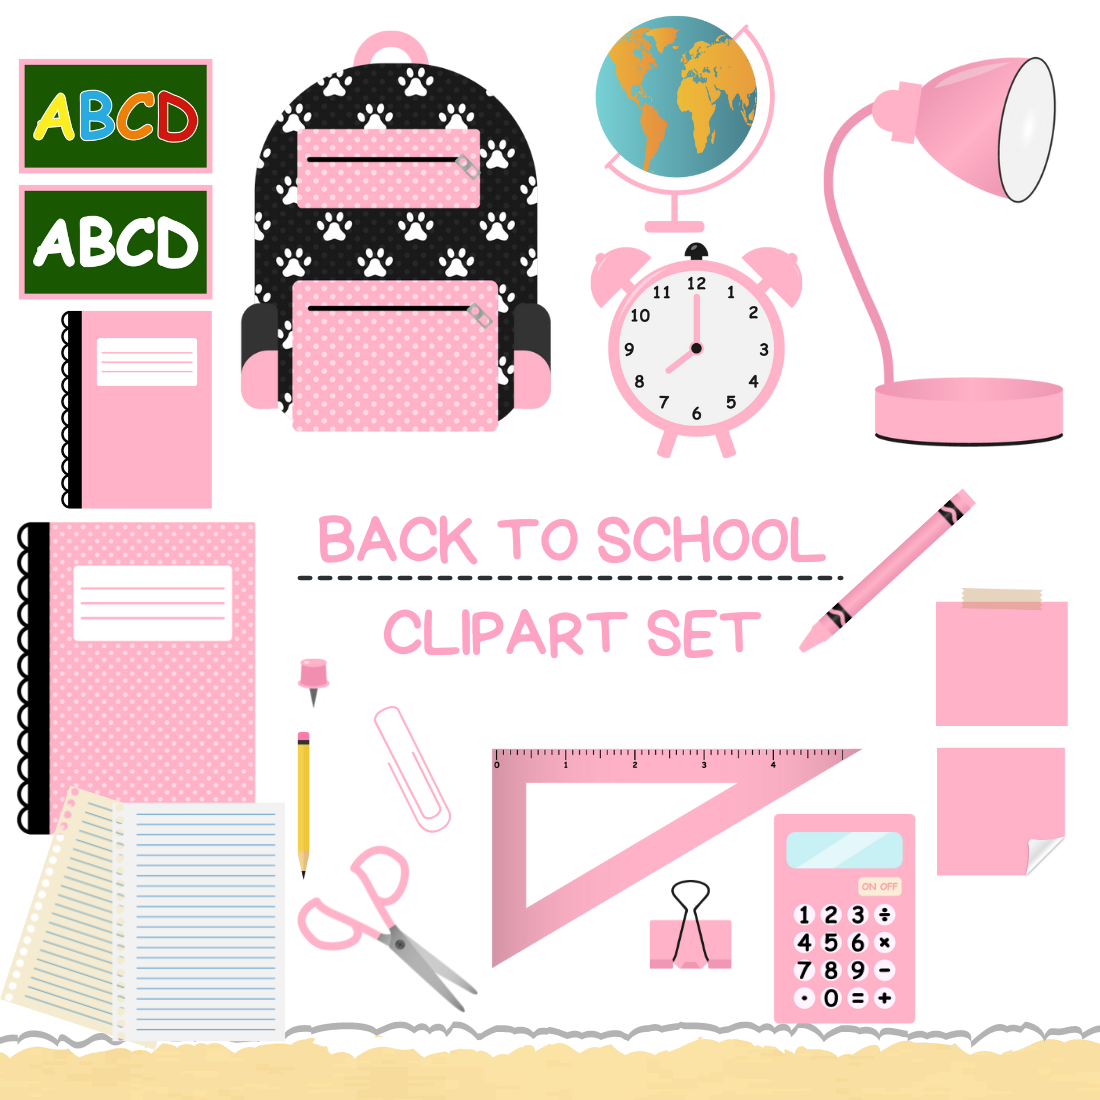 School Supplies Pink - Back to School Stationary Clip Art by